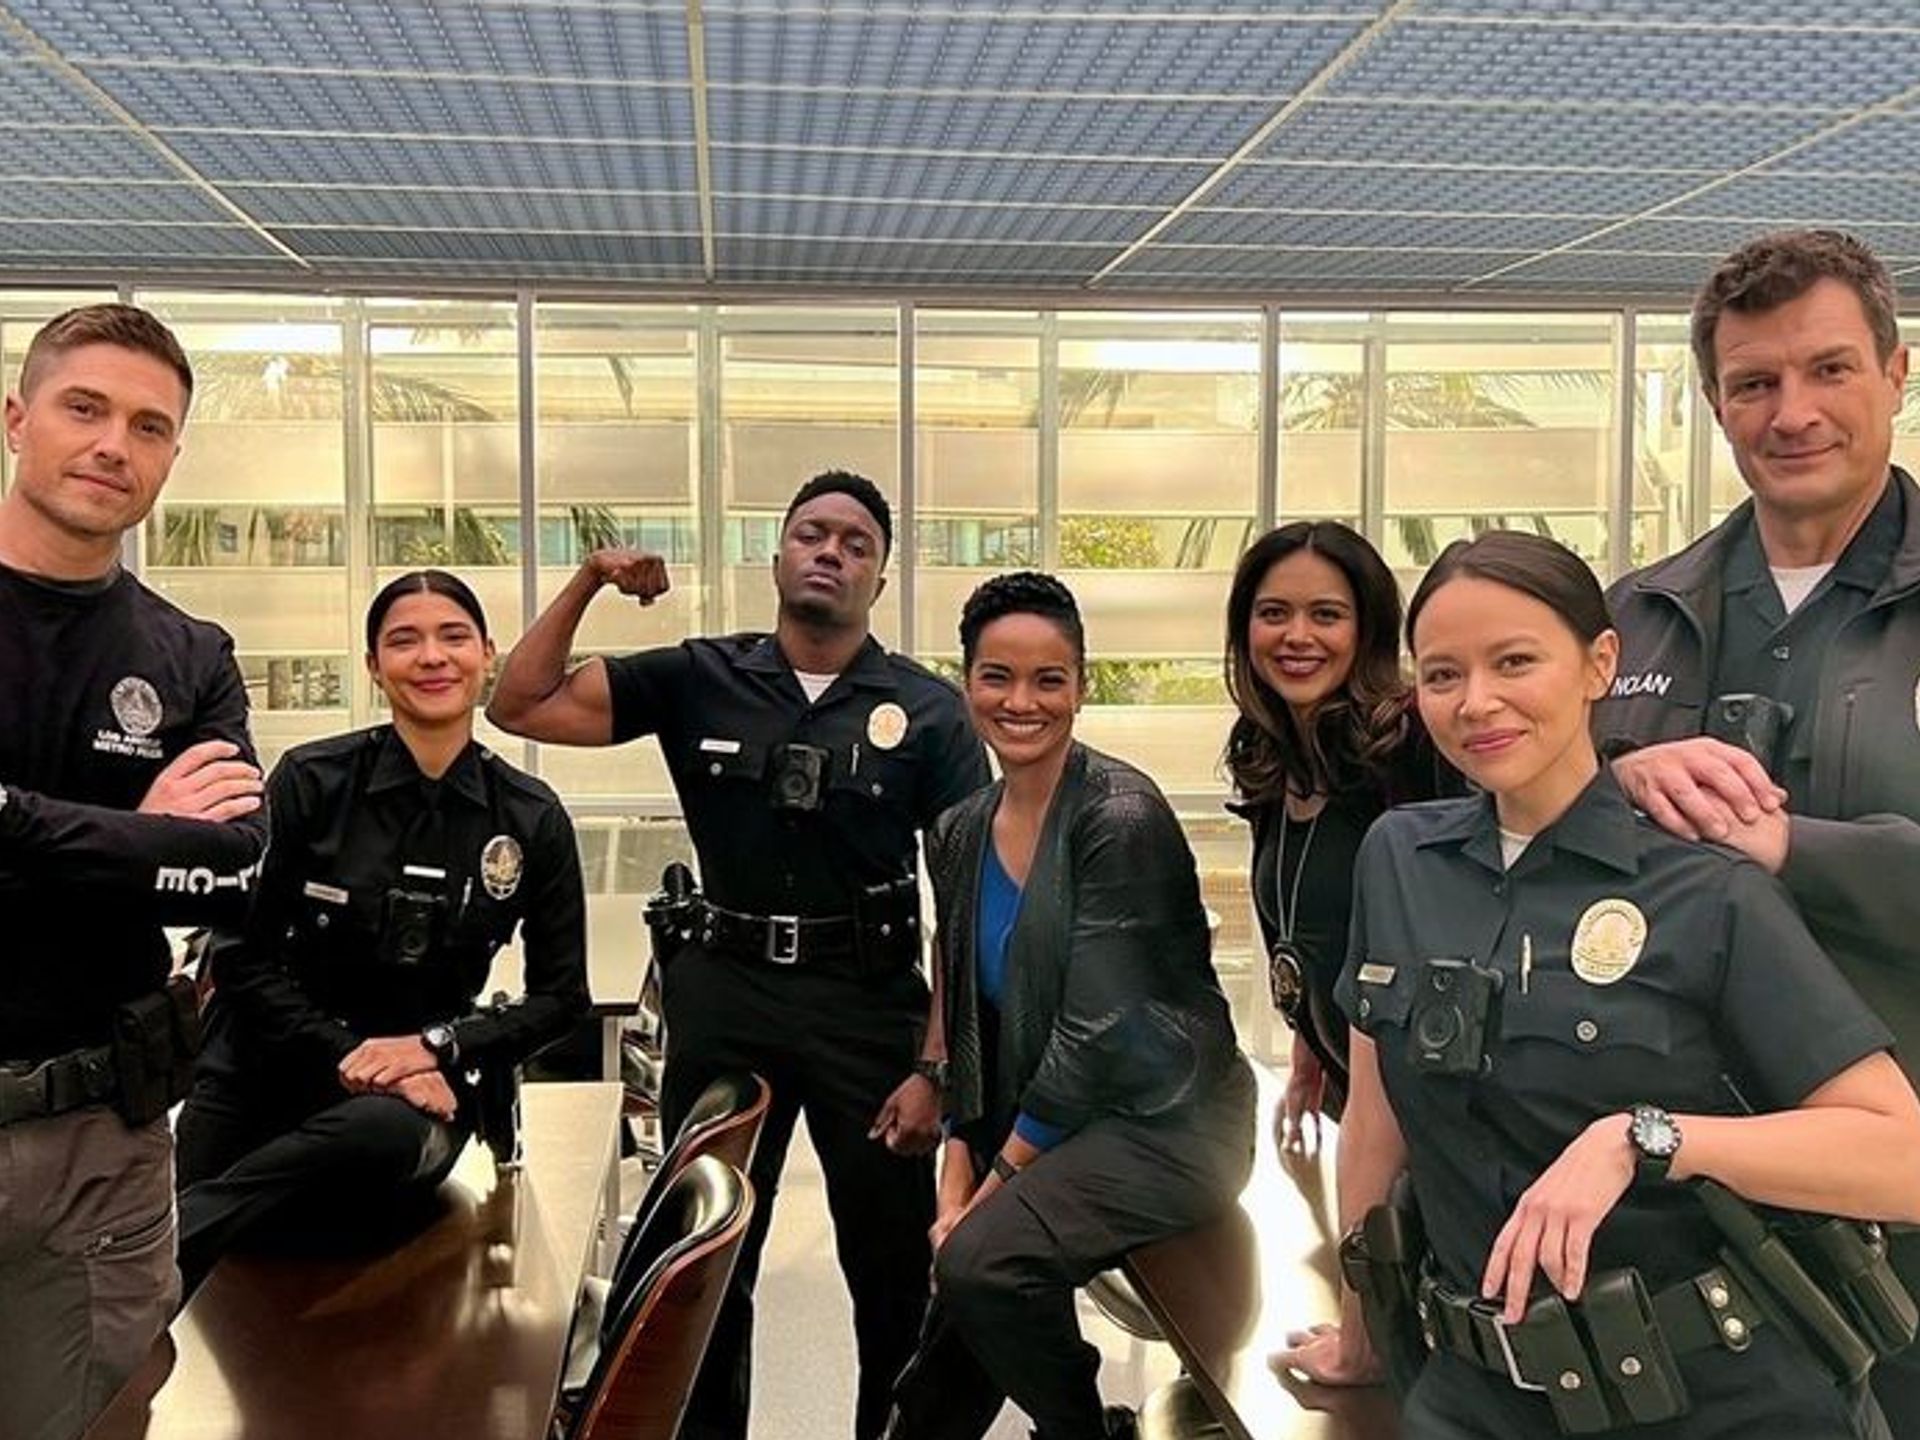 The Rookie Cast - Meet the Cast of The Rookie Season 2